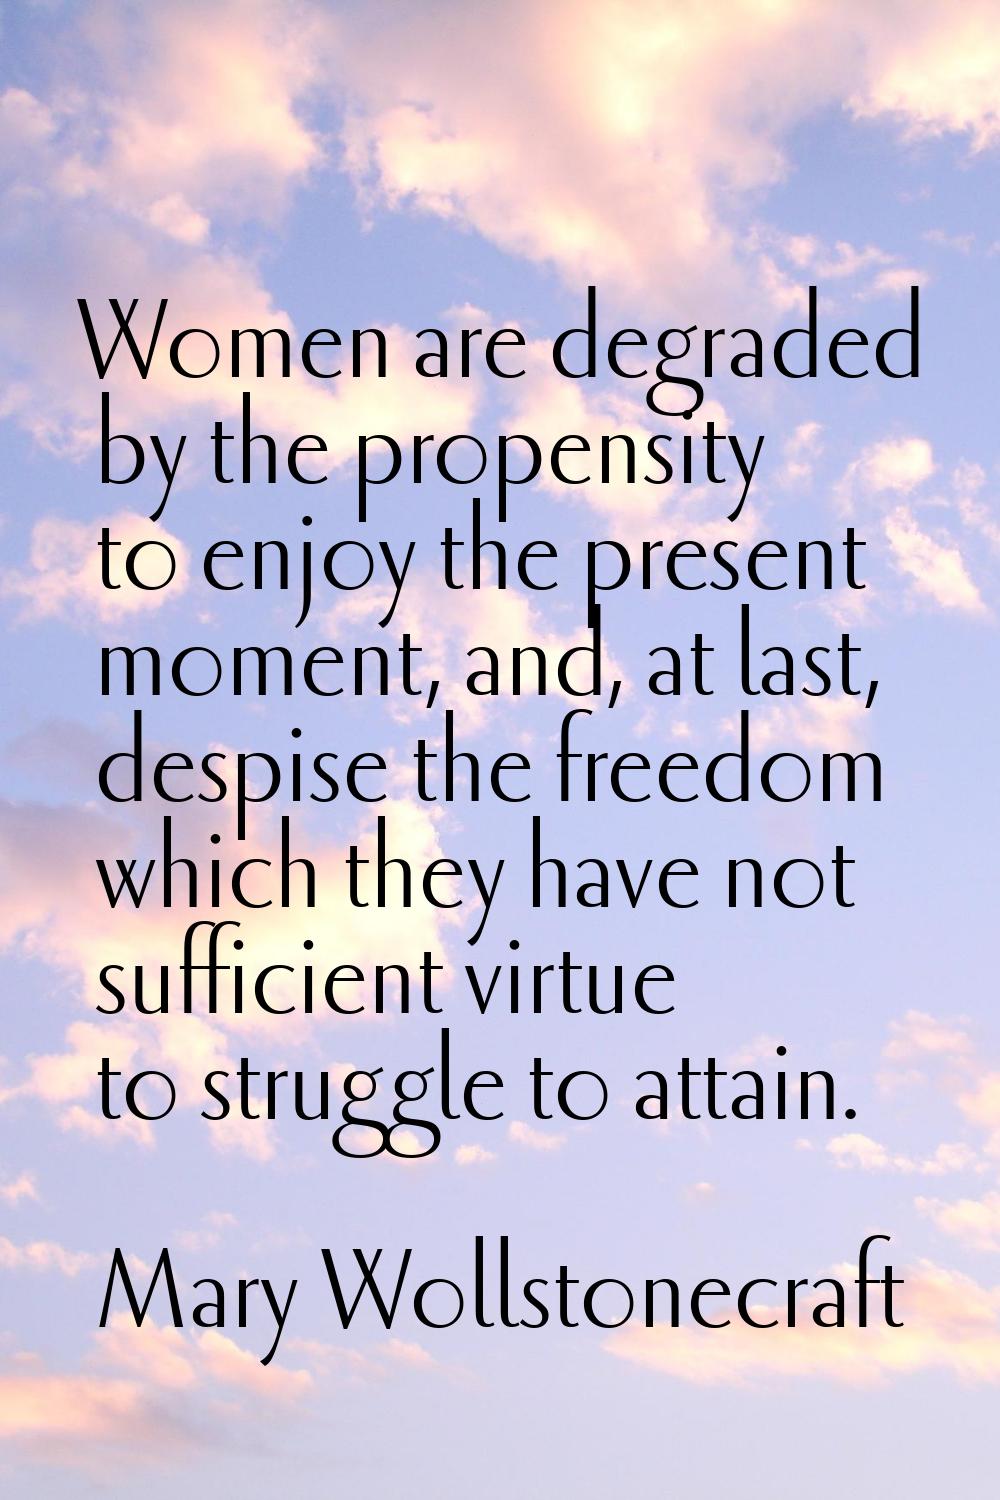 Women are degraded by the propensity to enjoy the present moment, and, at last, despise the freedom